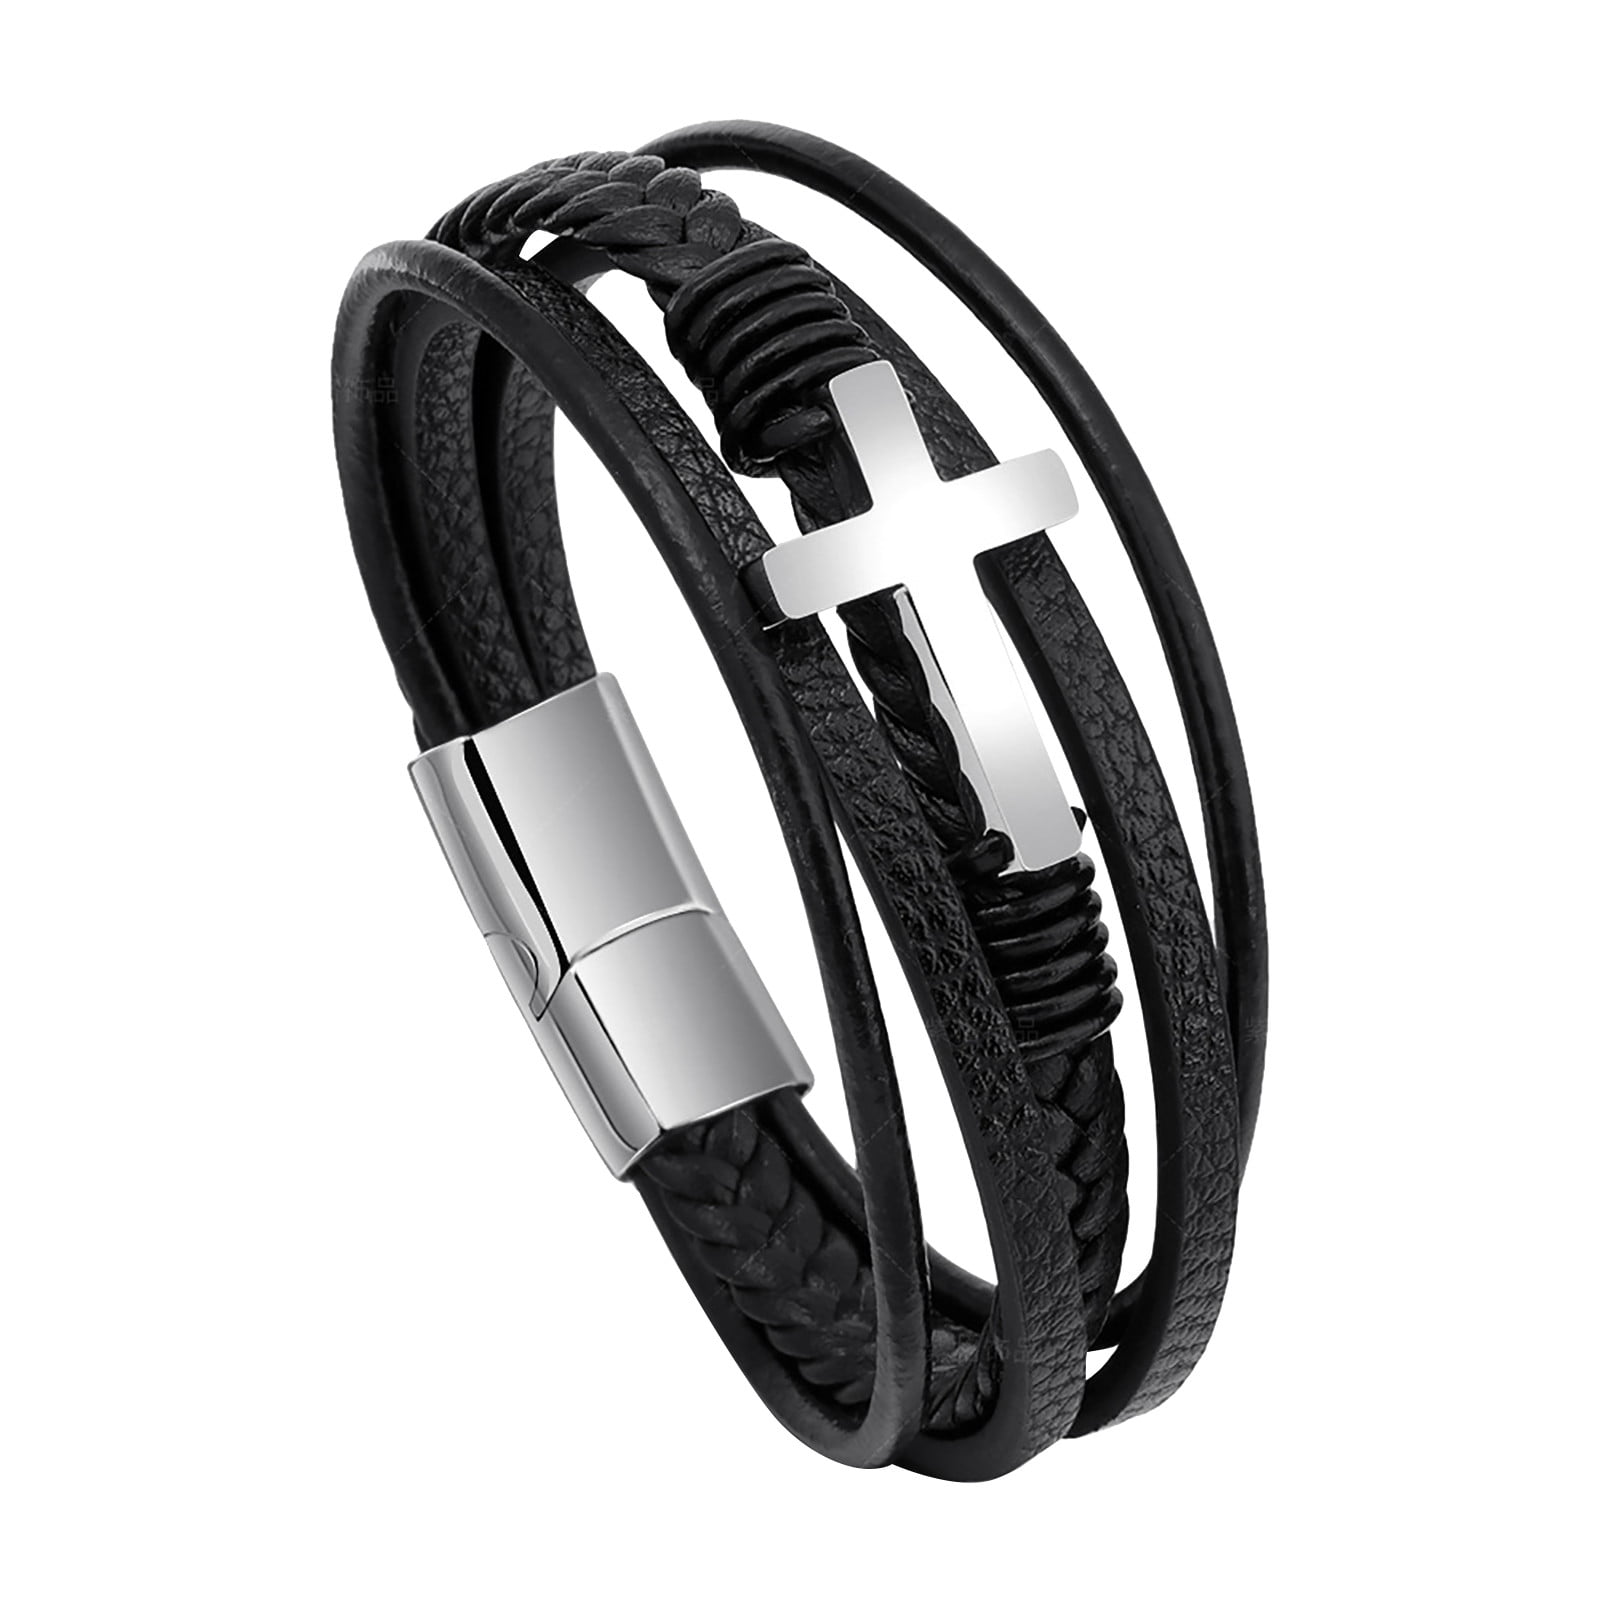 Men's Stainless Steel Leather Bracelet Magnetic Silver Clasp Bangle Black 